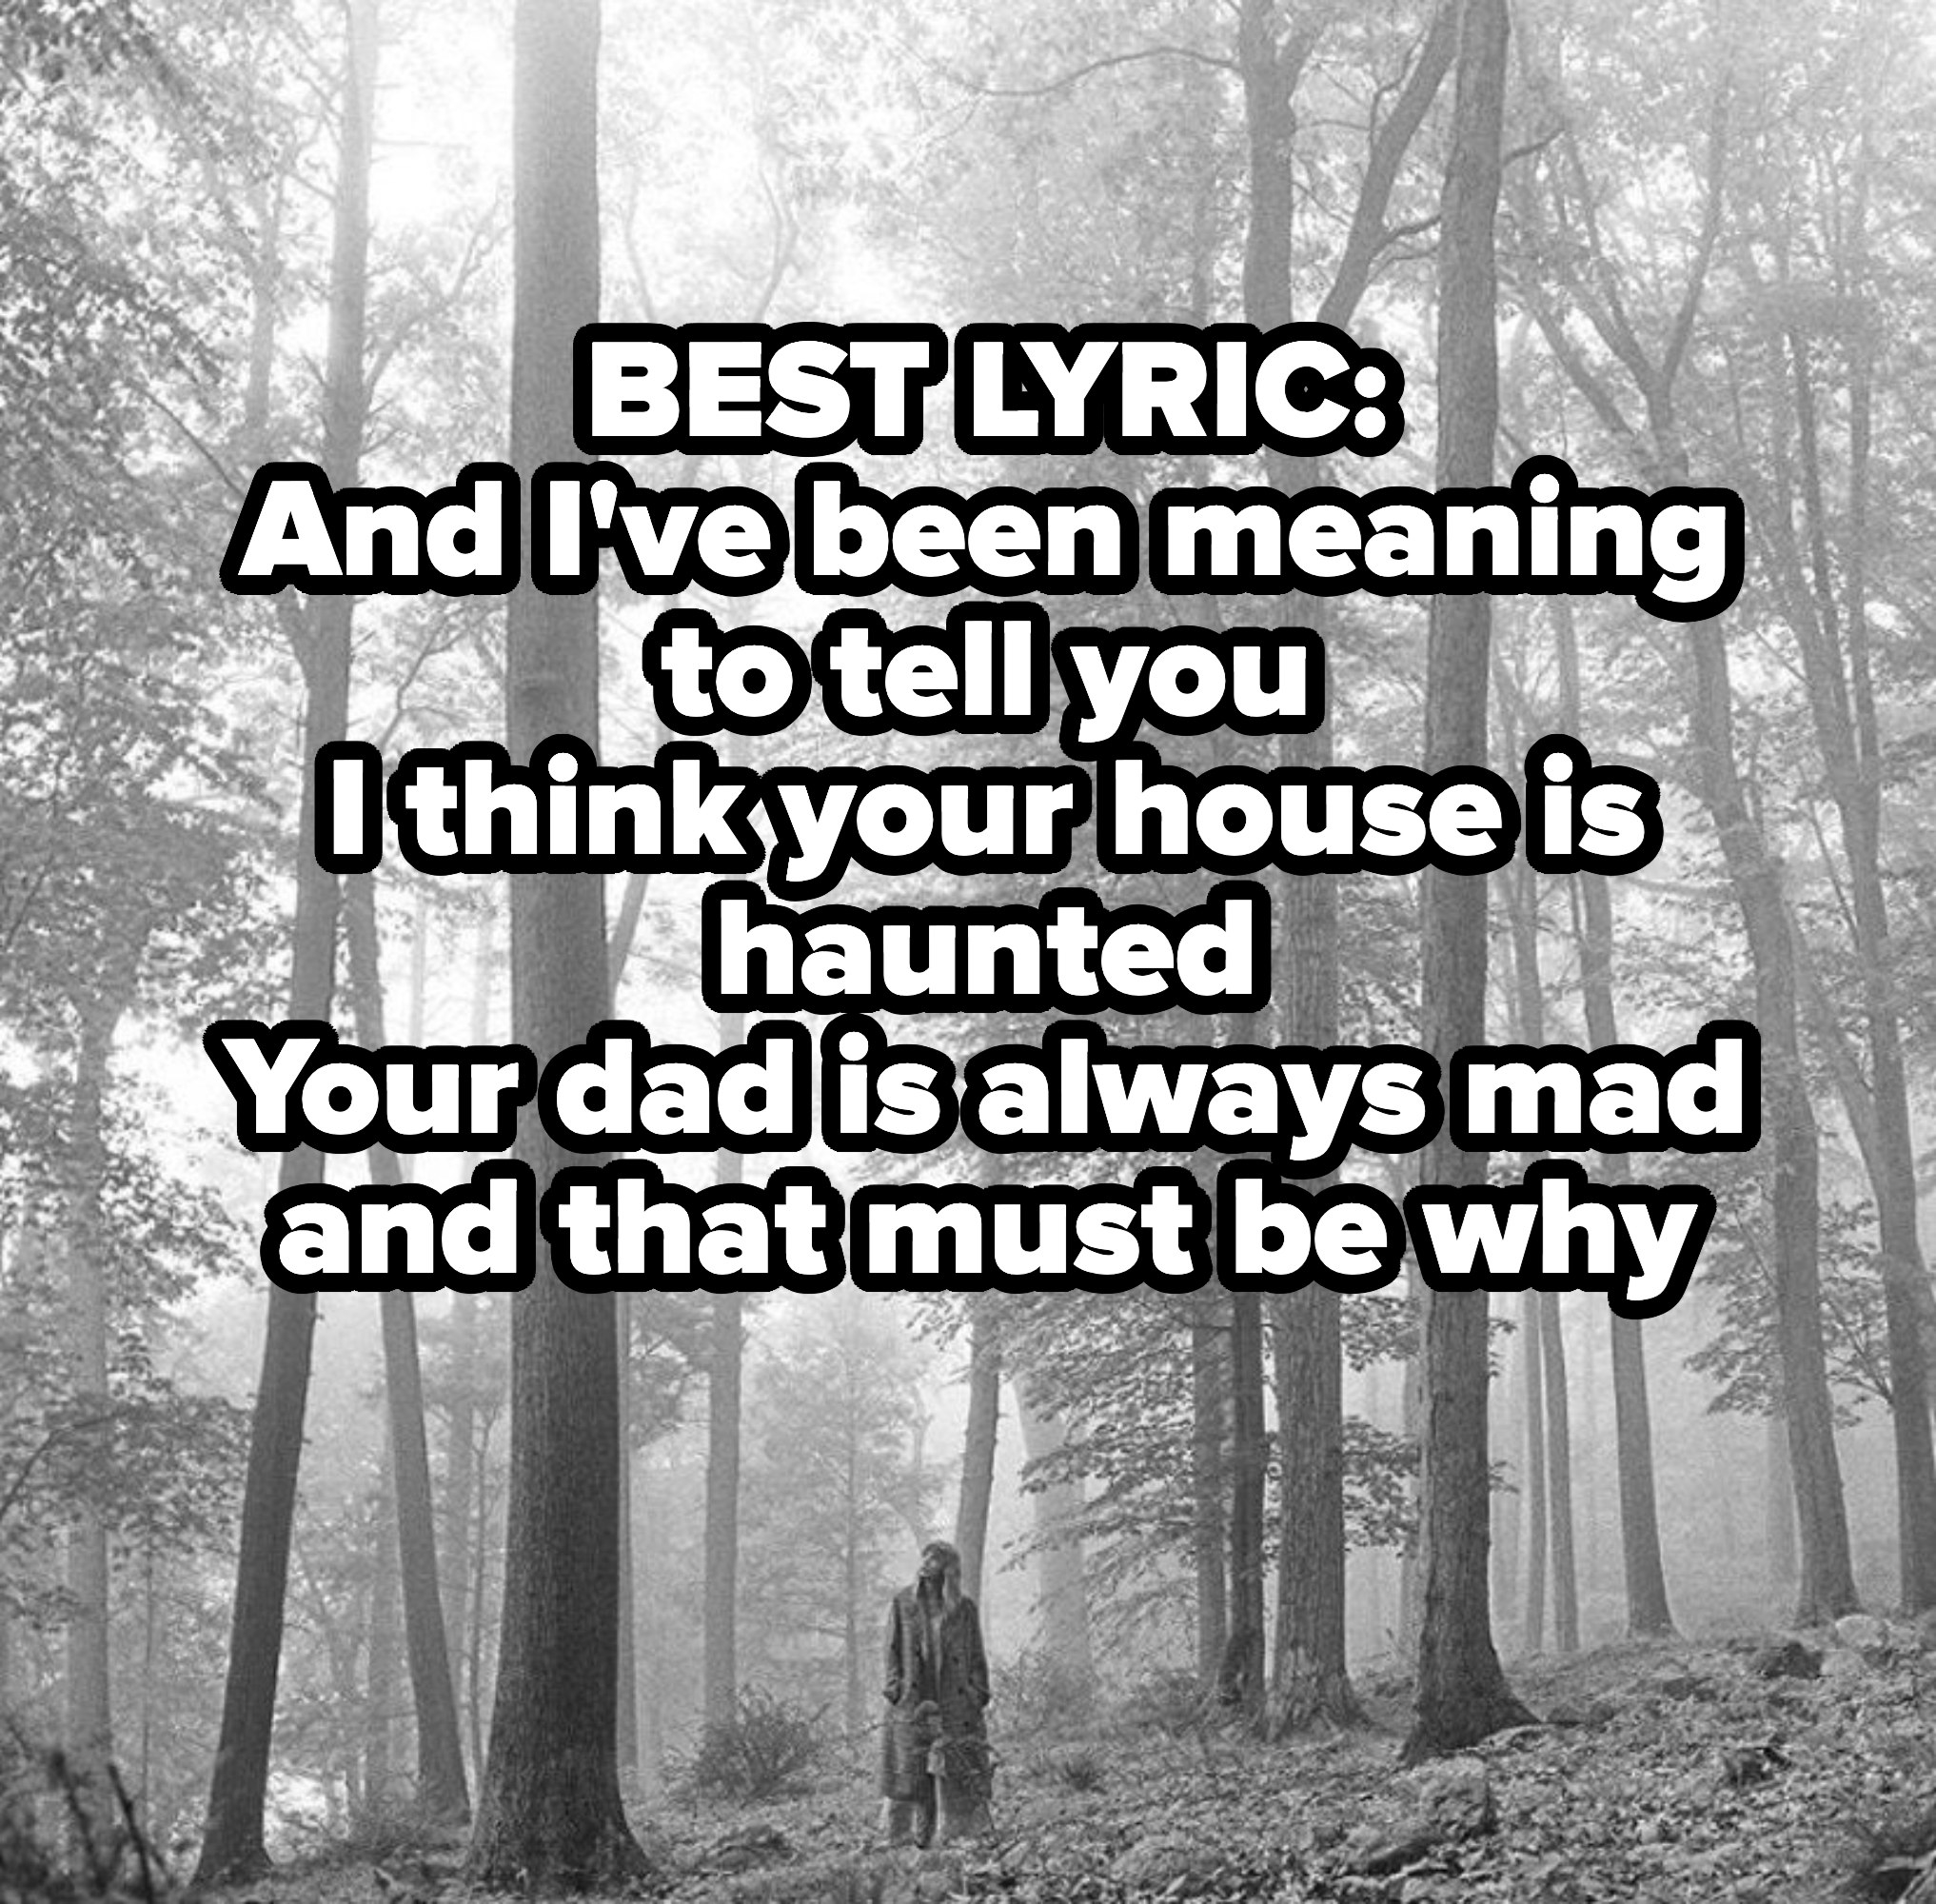 BEST LYRIC:
And I&#x27;ve been meaning to tell you
I think your house is haunted
Your dad is always mad and that must be why